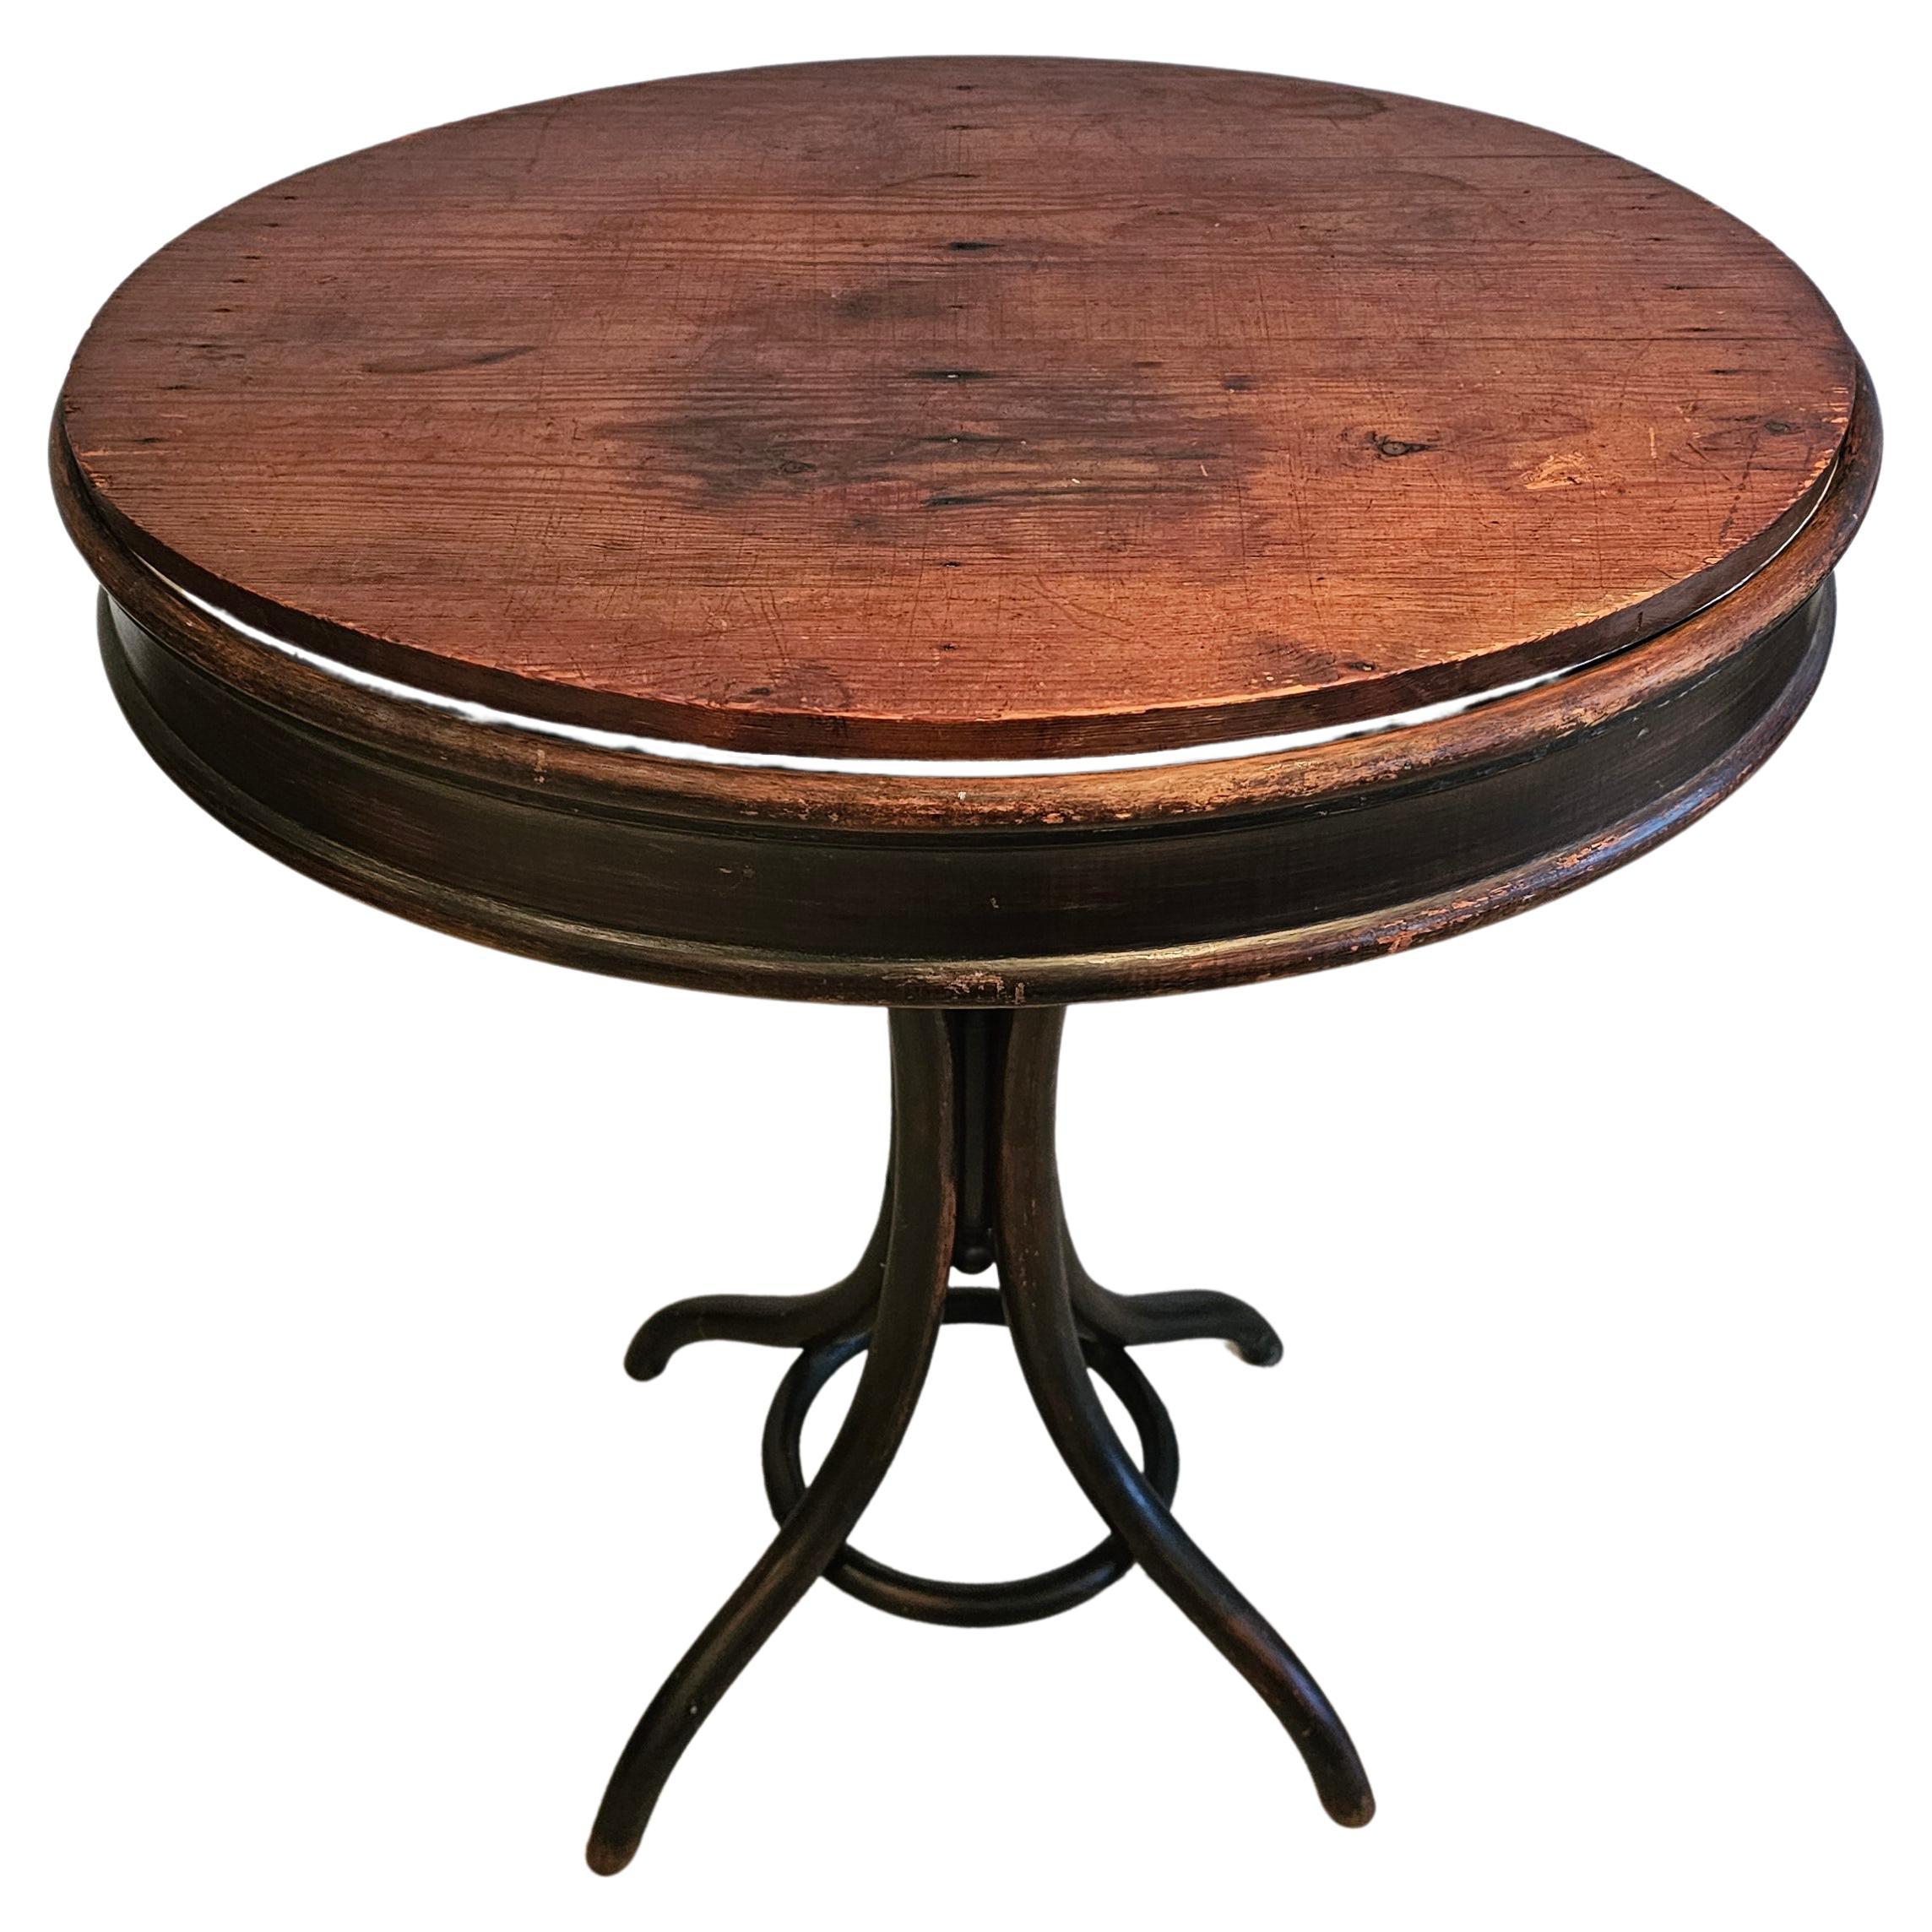 Rare, Wooden Flower Table from Jacob and Josef Khon For Sale